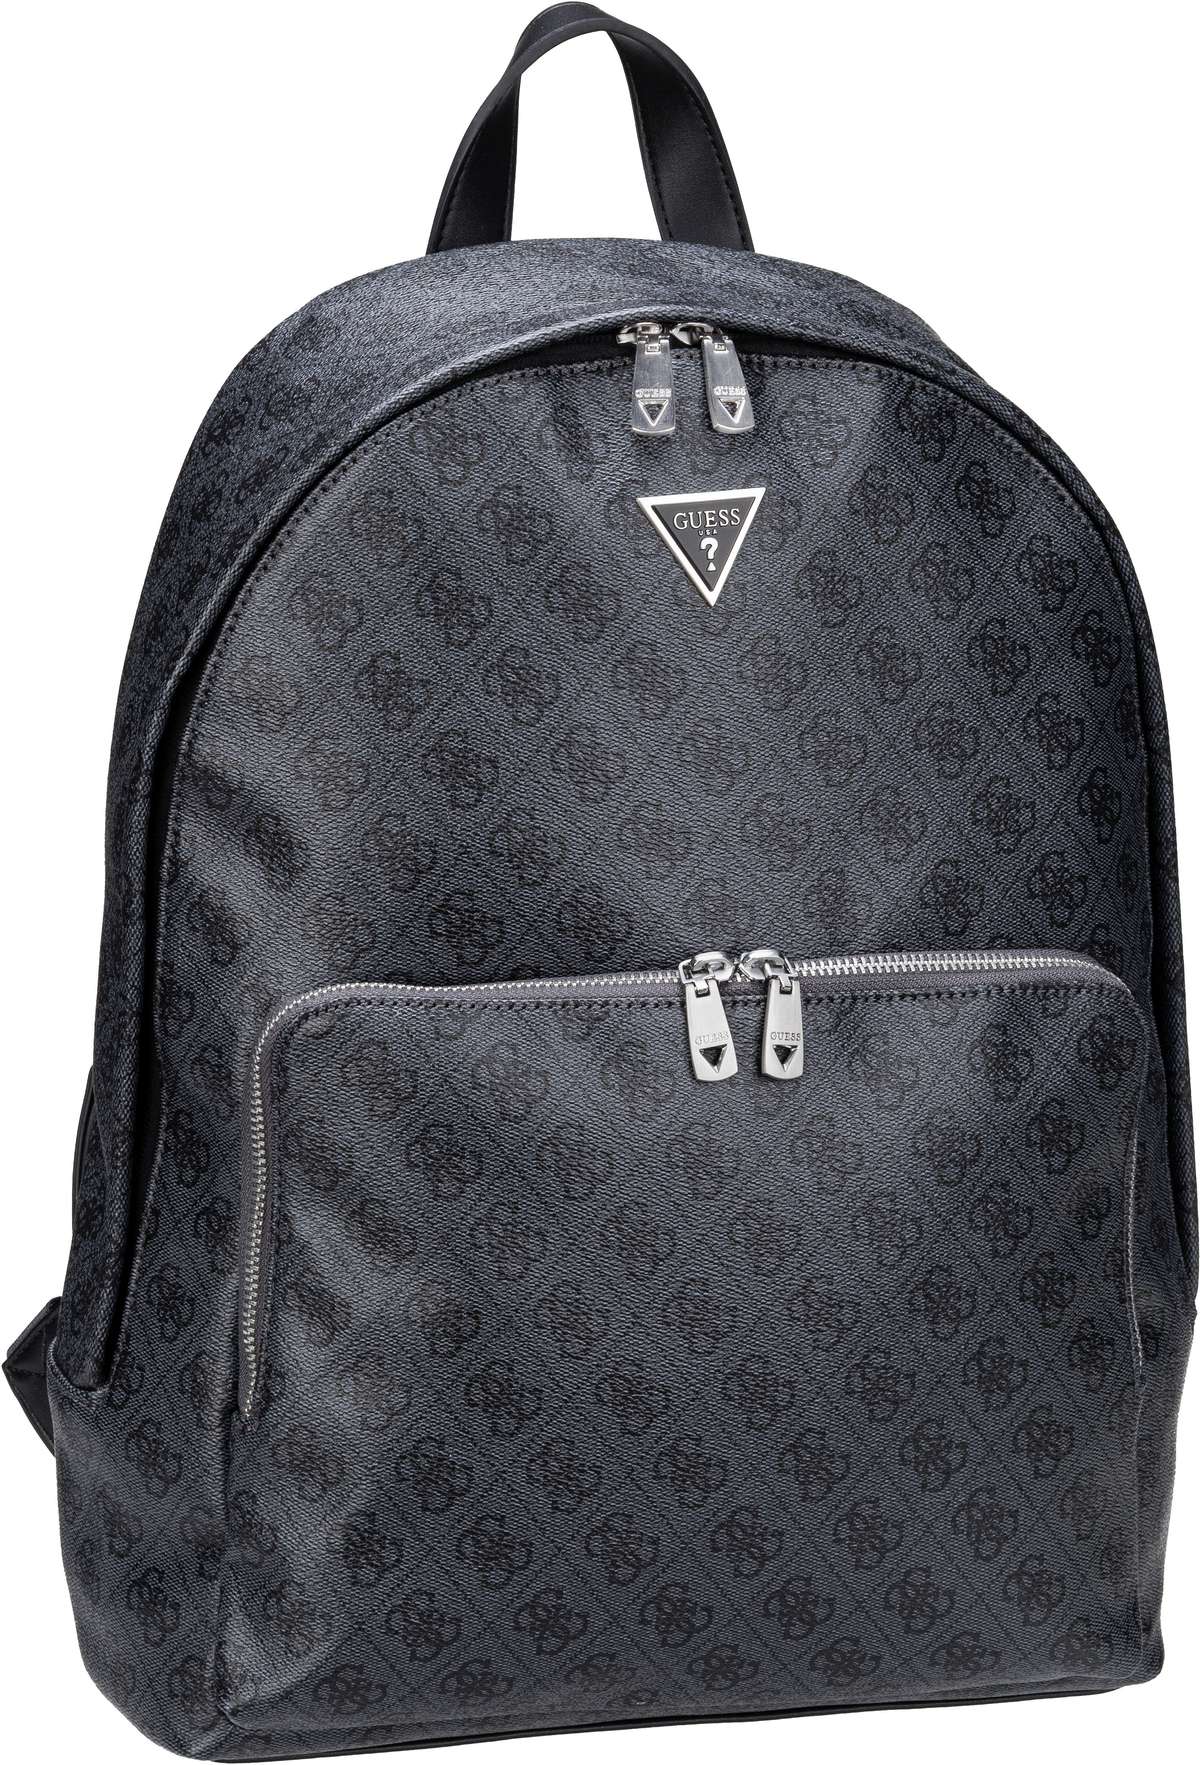 Guess Milano 4G Eco Compact  in Grau (21.6 Liter), Rucksack / Backpack